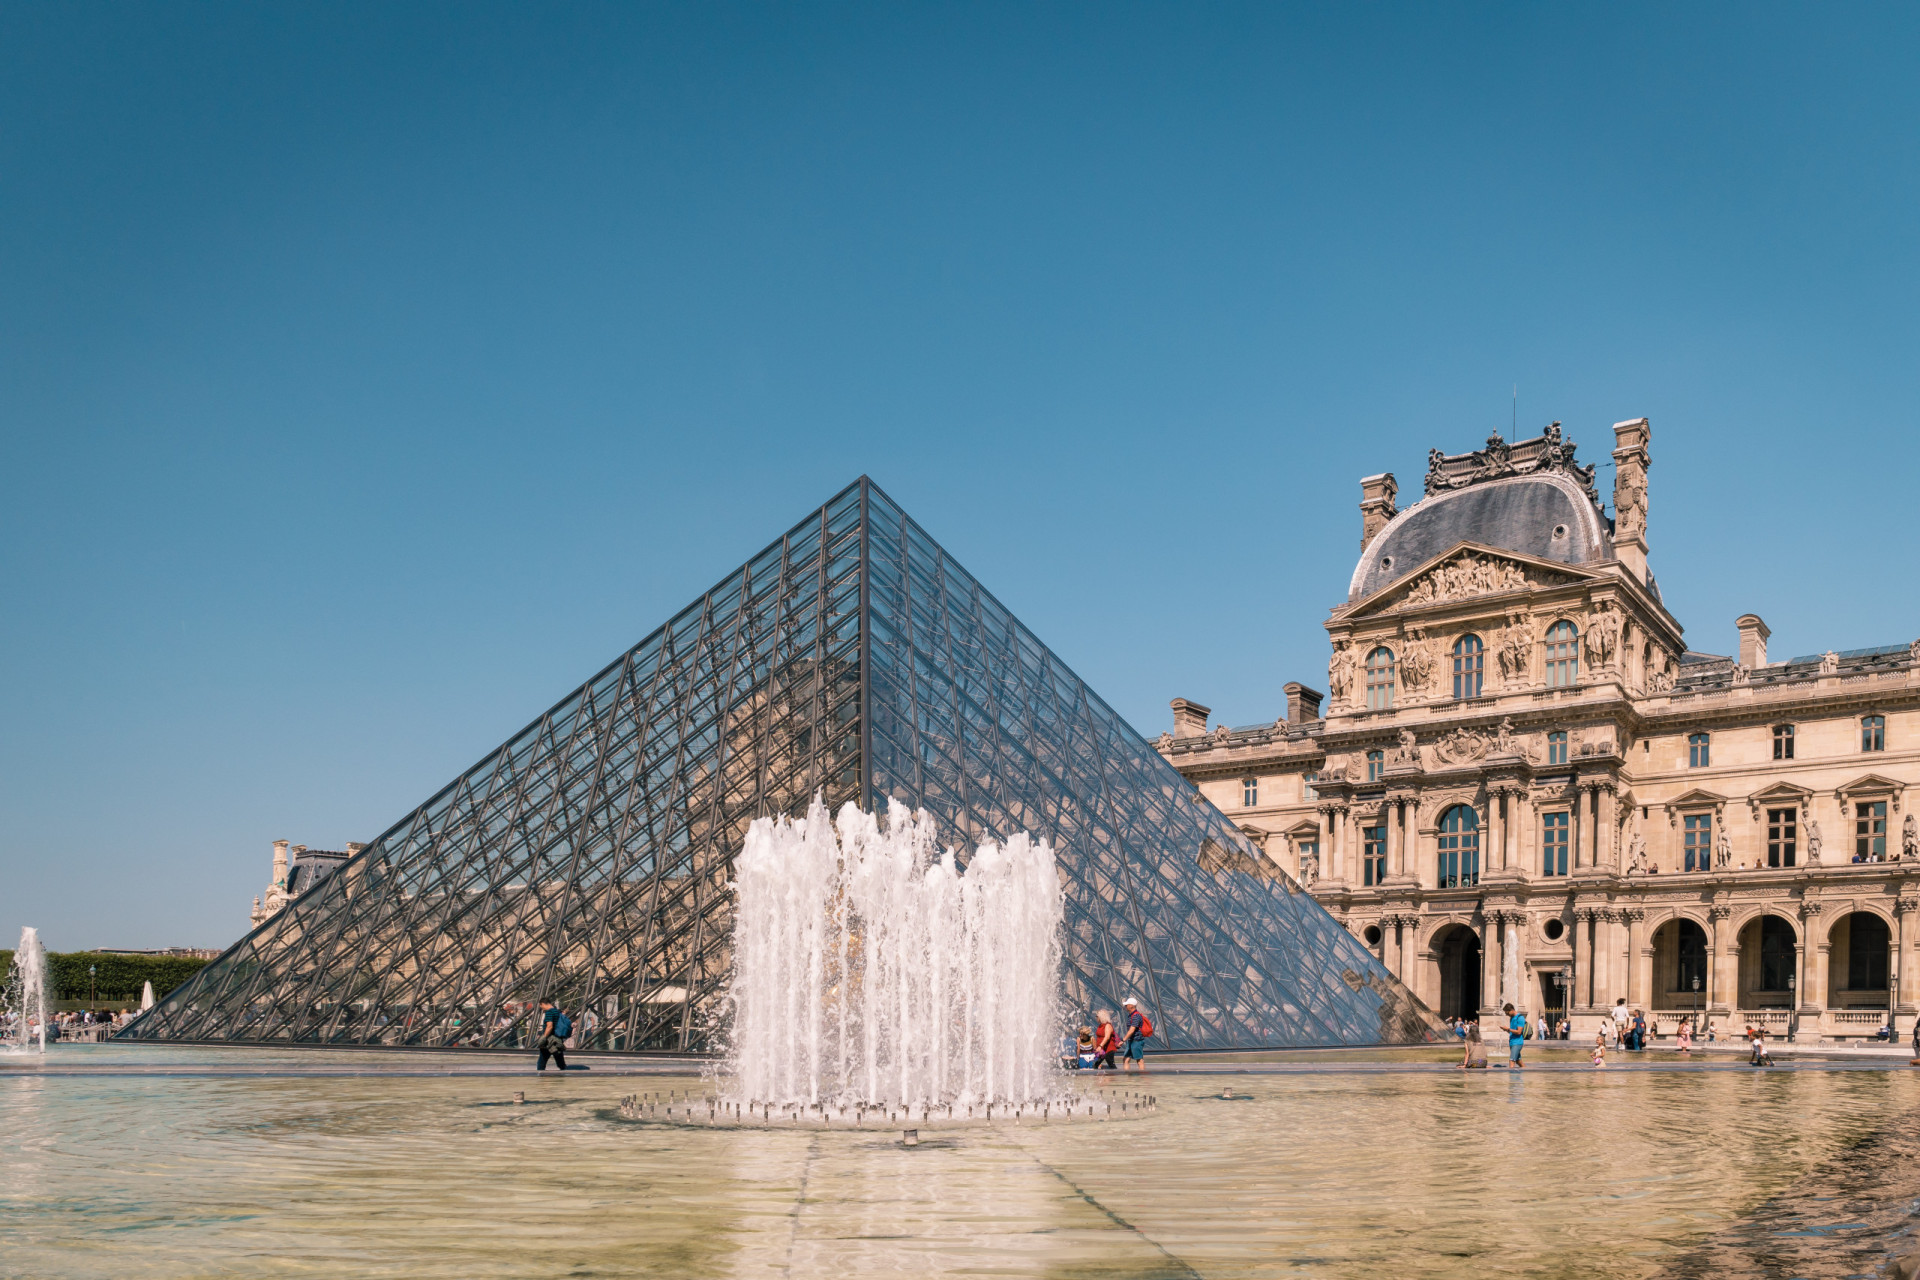 <p>Pickpocketing gangs often target the Louvre Museum in Paris. Be wary when waiting in line or while admiring paintings.</p><p><a href="https://www.msn.com/en-us/community/channel/vid-7xx8mnucu55yw63we9va2gwr7uihbxwc68fxqp25x6tg4ftibpra?cvid=94631541bc0f4f89bfd59158d696ad7e">Follow us and access great exclusive content every day</a></p>